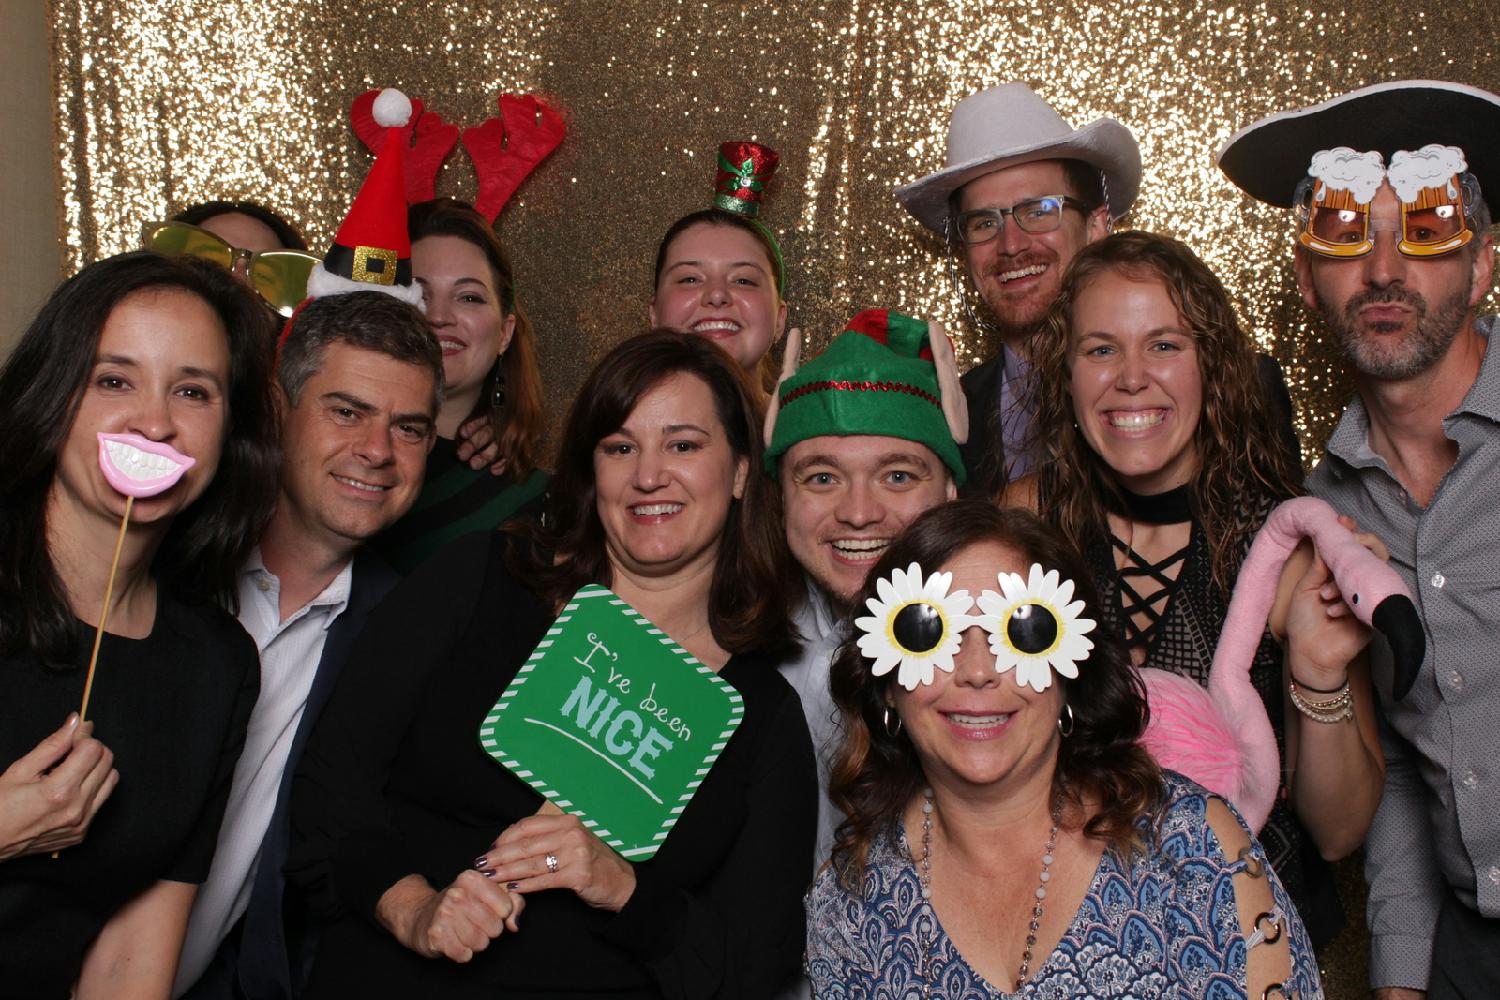 Annual holiday party wouldn't be complete without a photo booth!